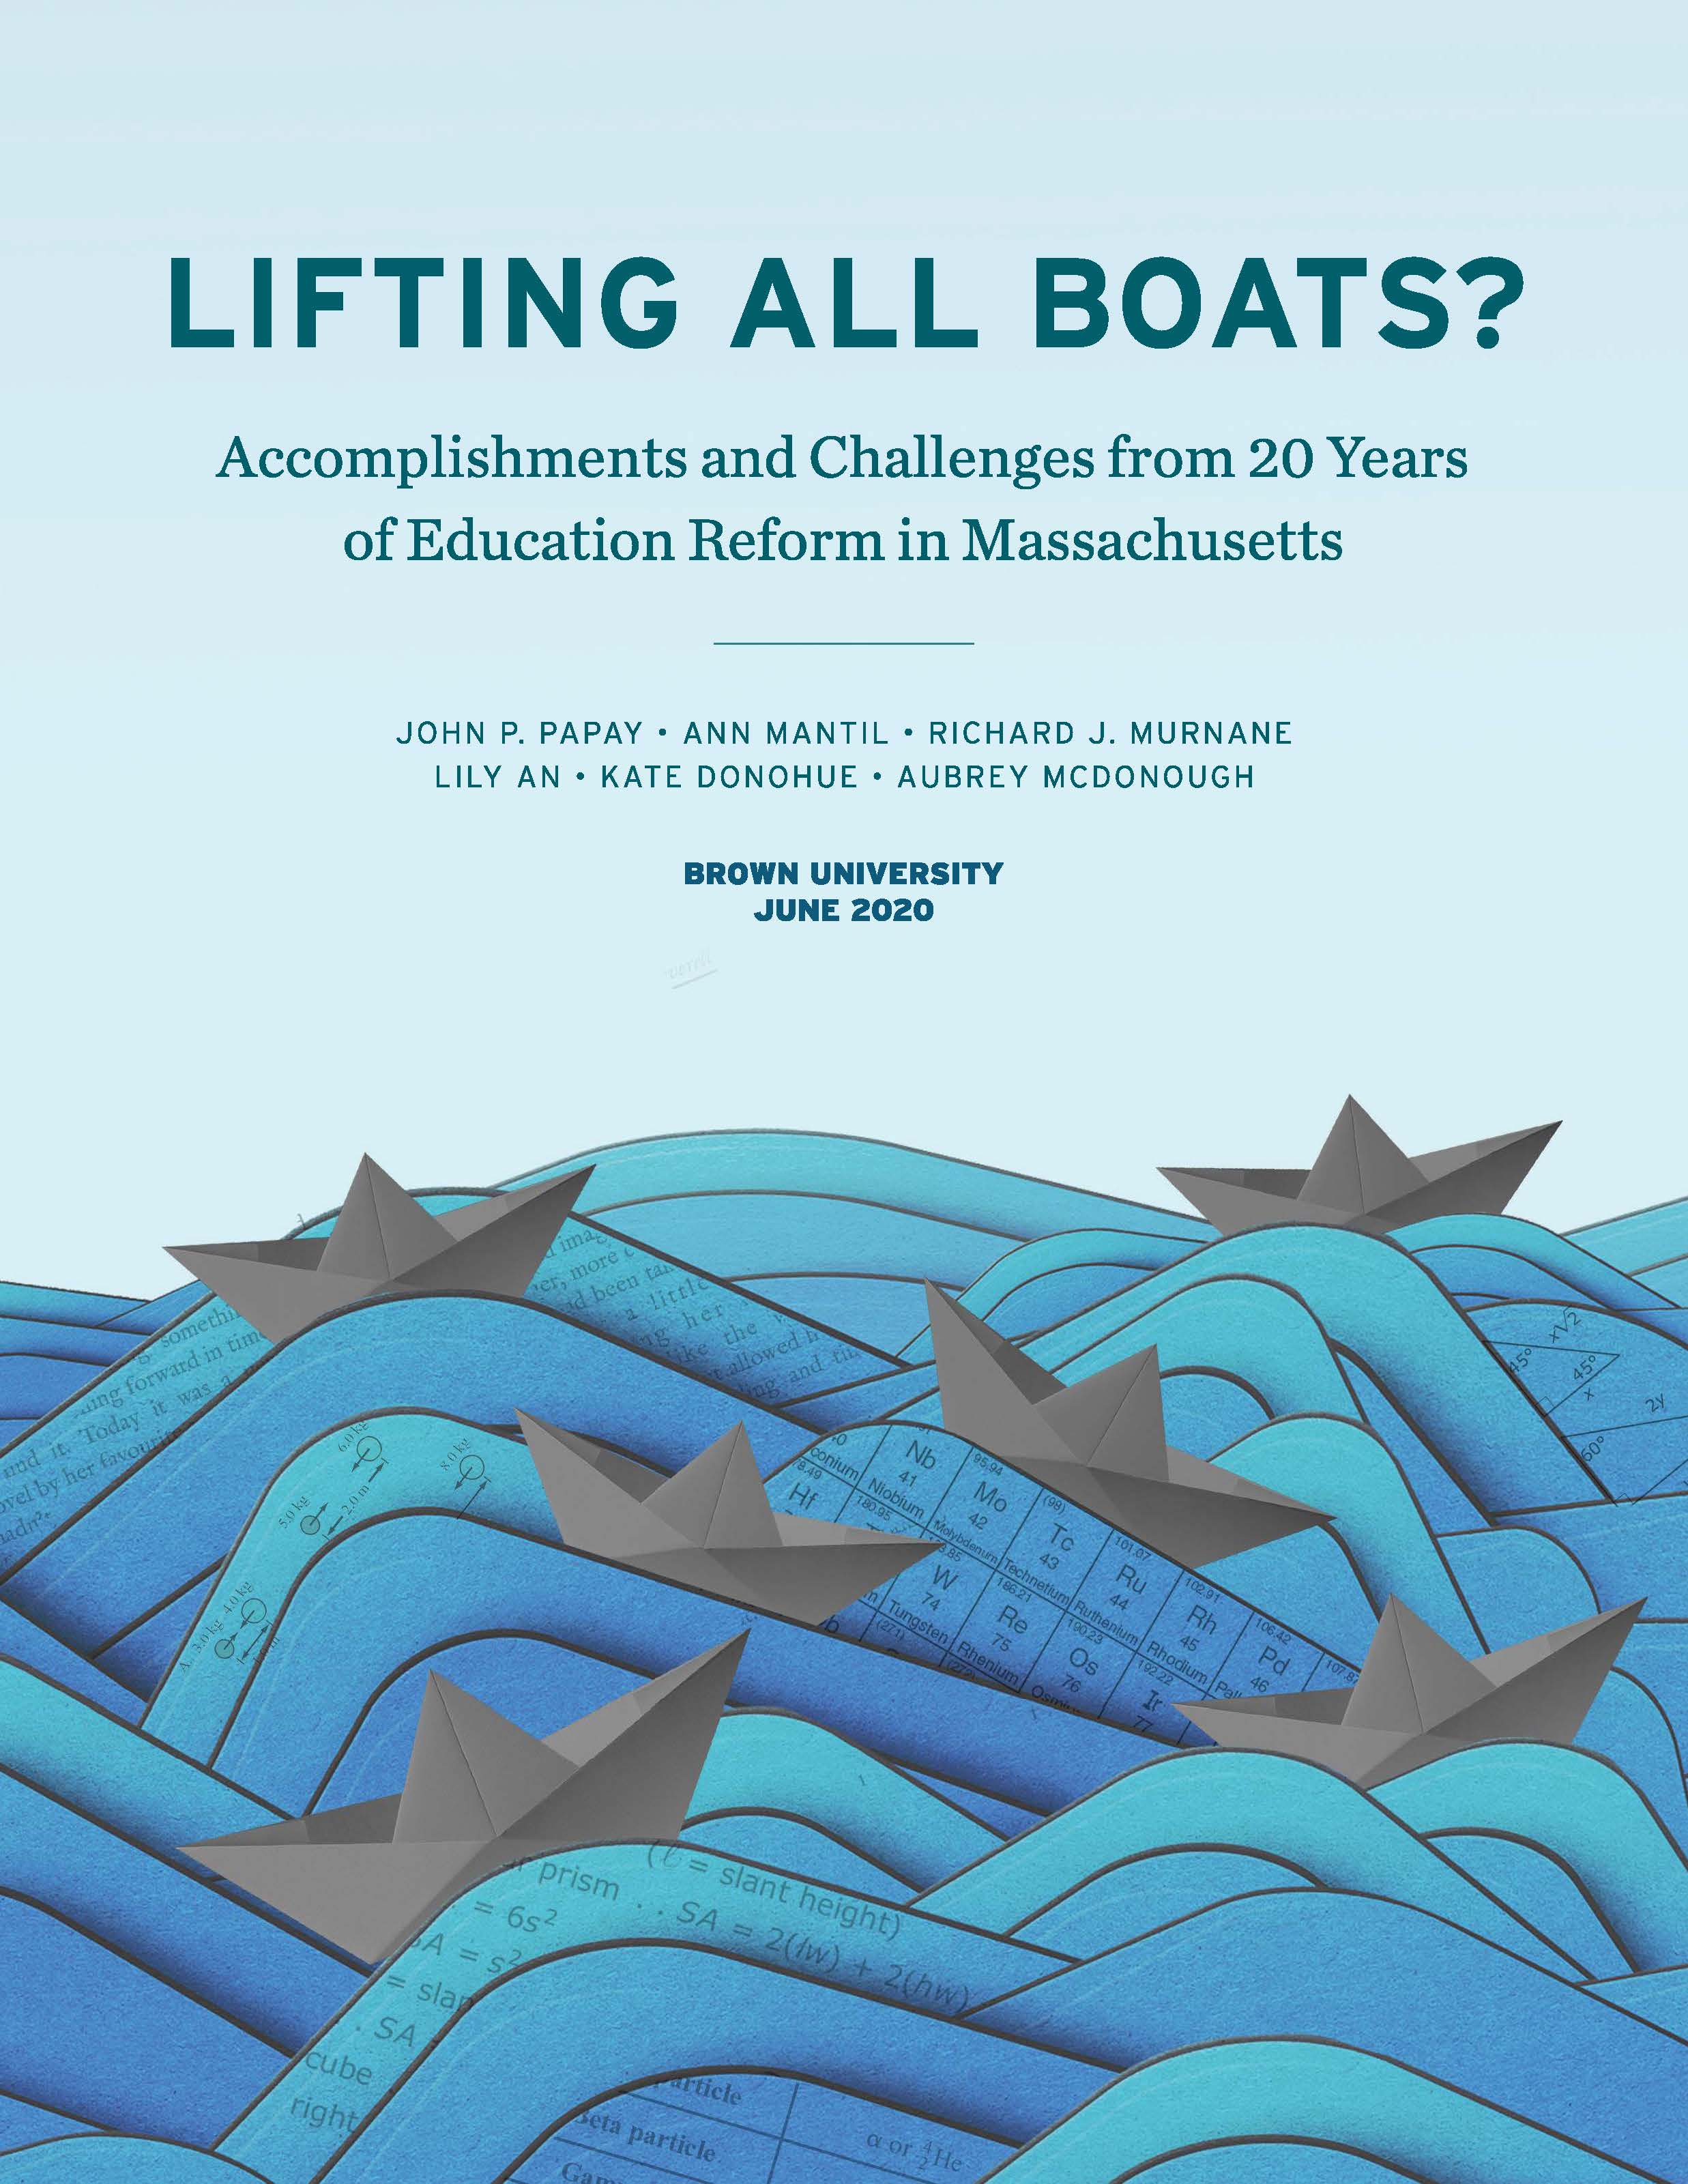 Lifting all Boats? Accomplishments and Challenges from 20 Years of Education Reform in Massachusetts